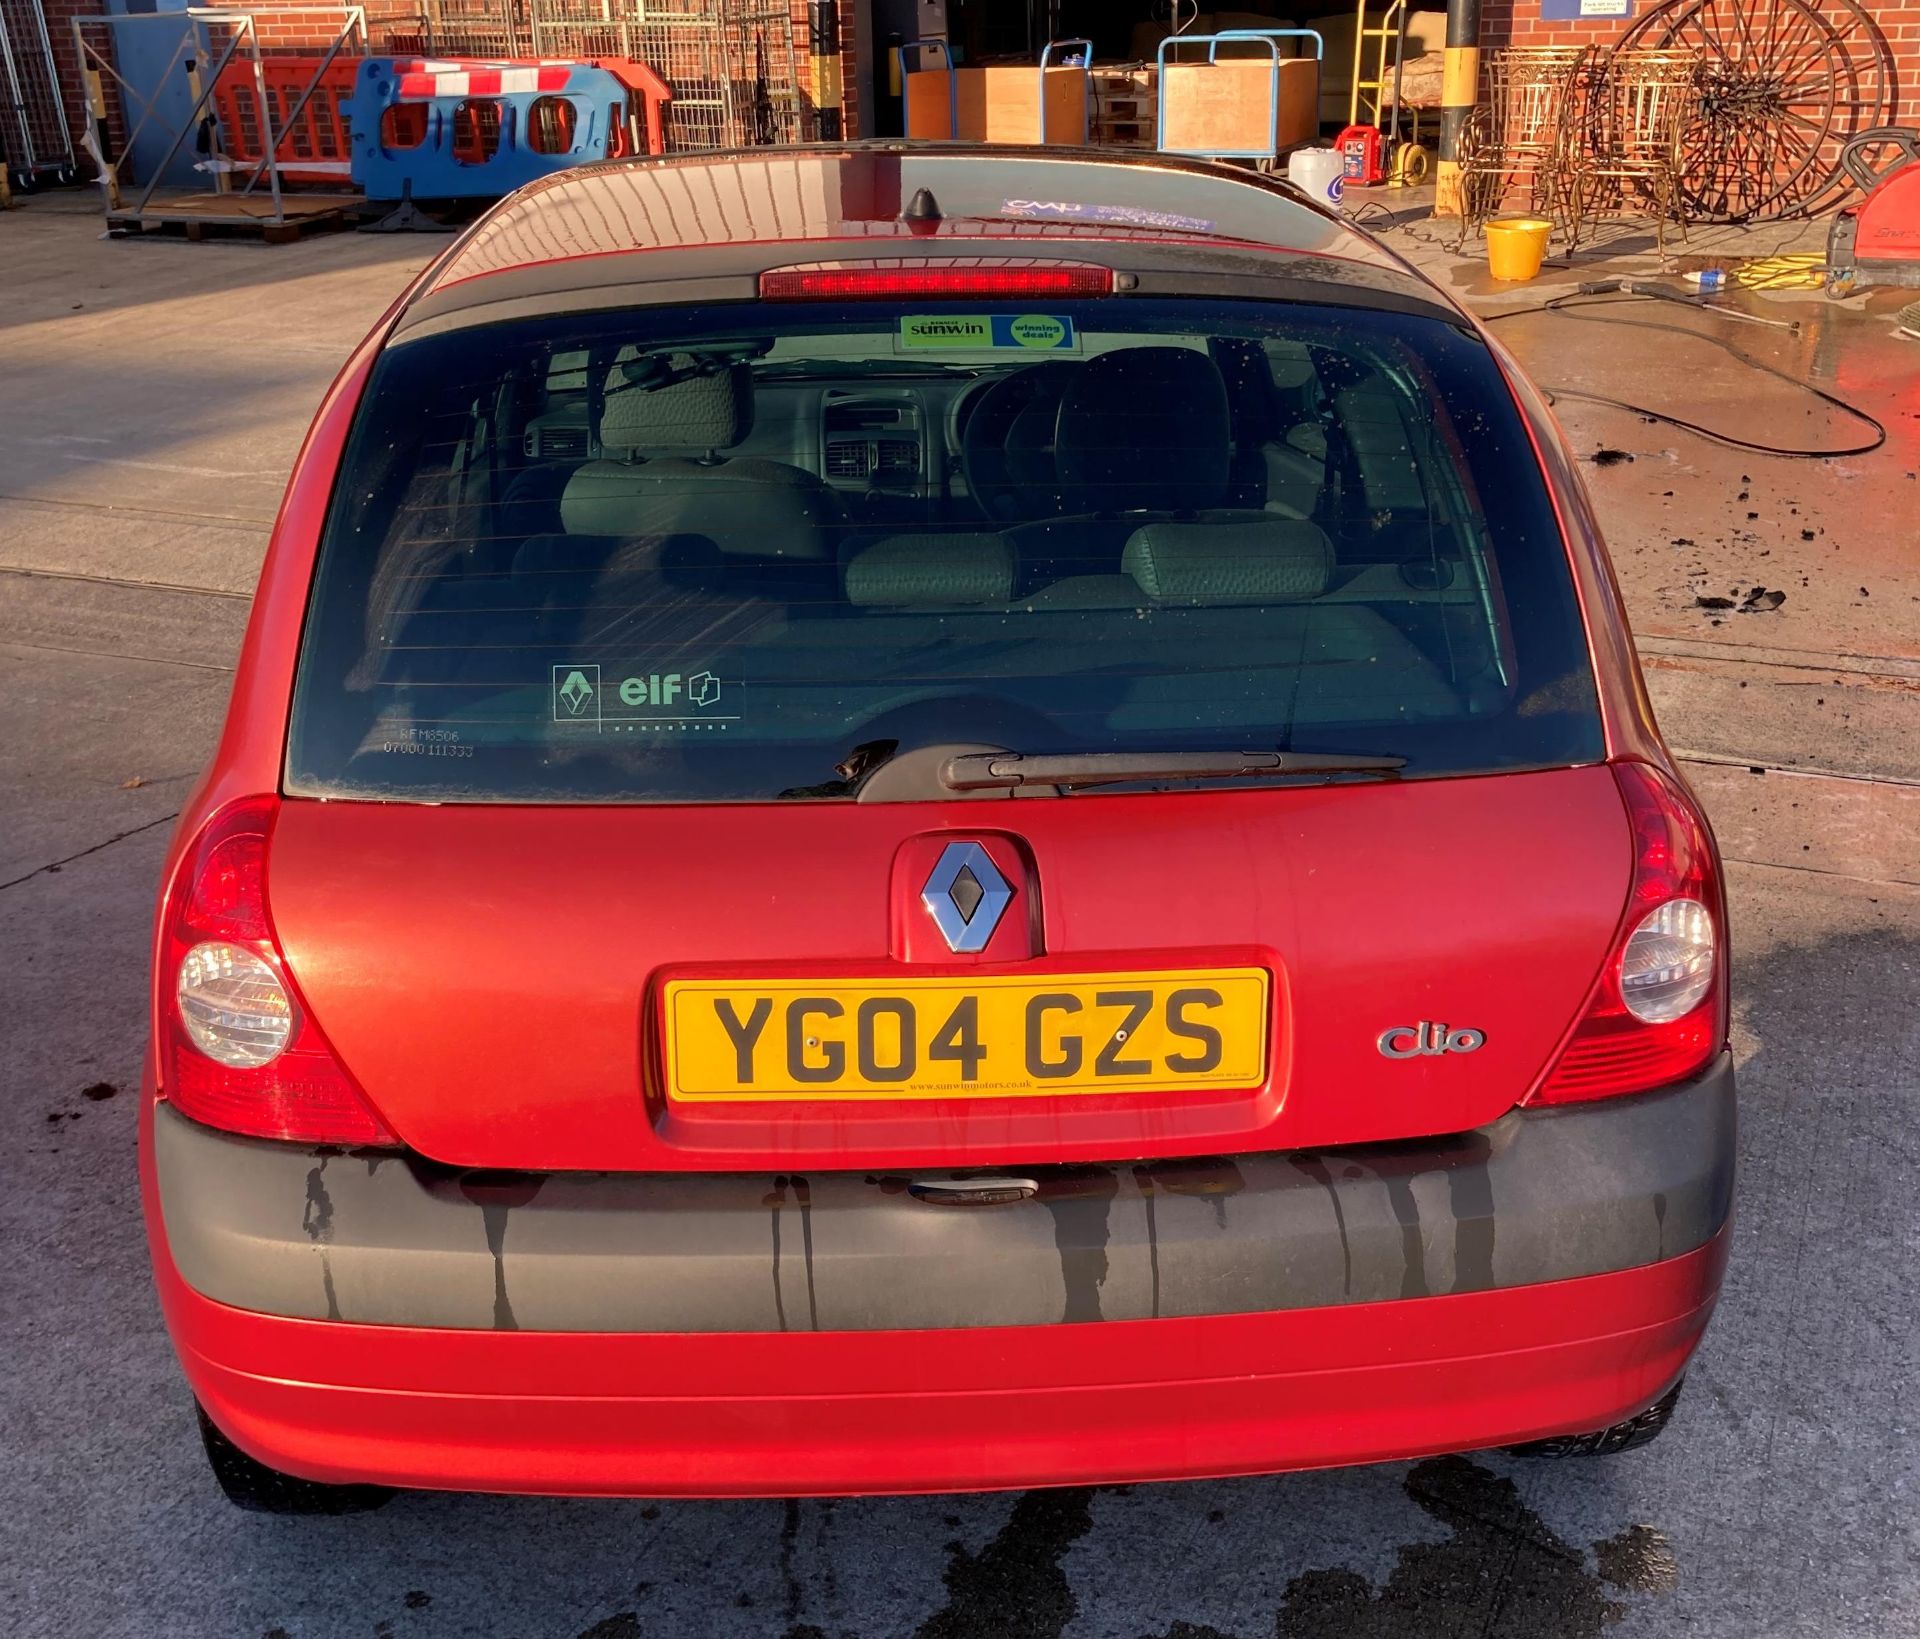 RENAULT CLIO EXPRESSION 16V (1149cc) THREE DOOR HATCHBACK - Petrol - Red. - Image 9 of 15